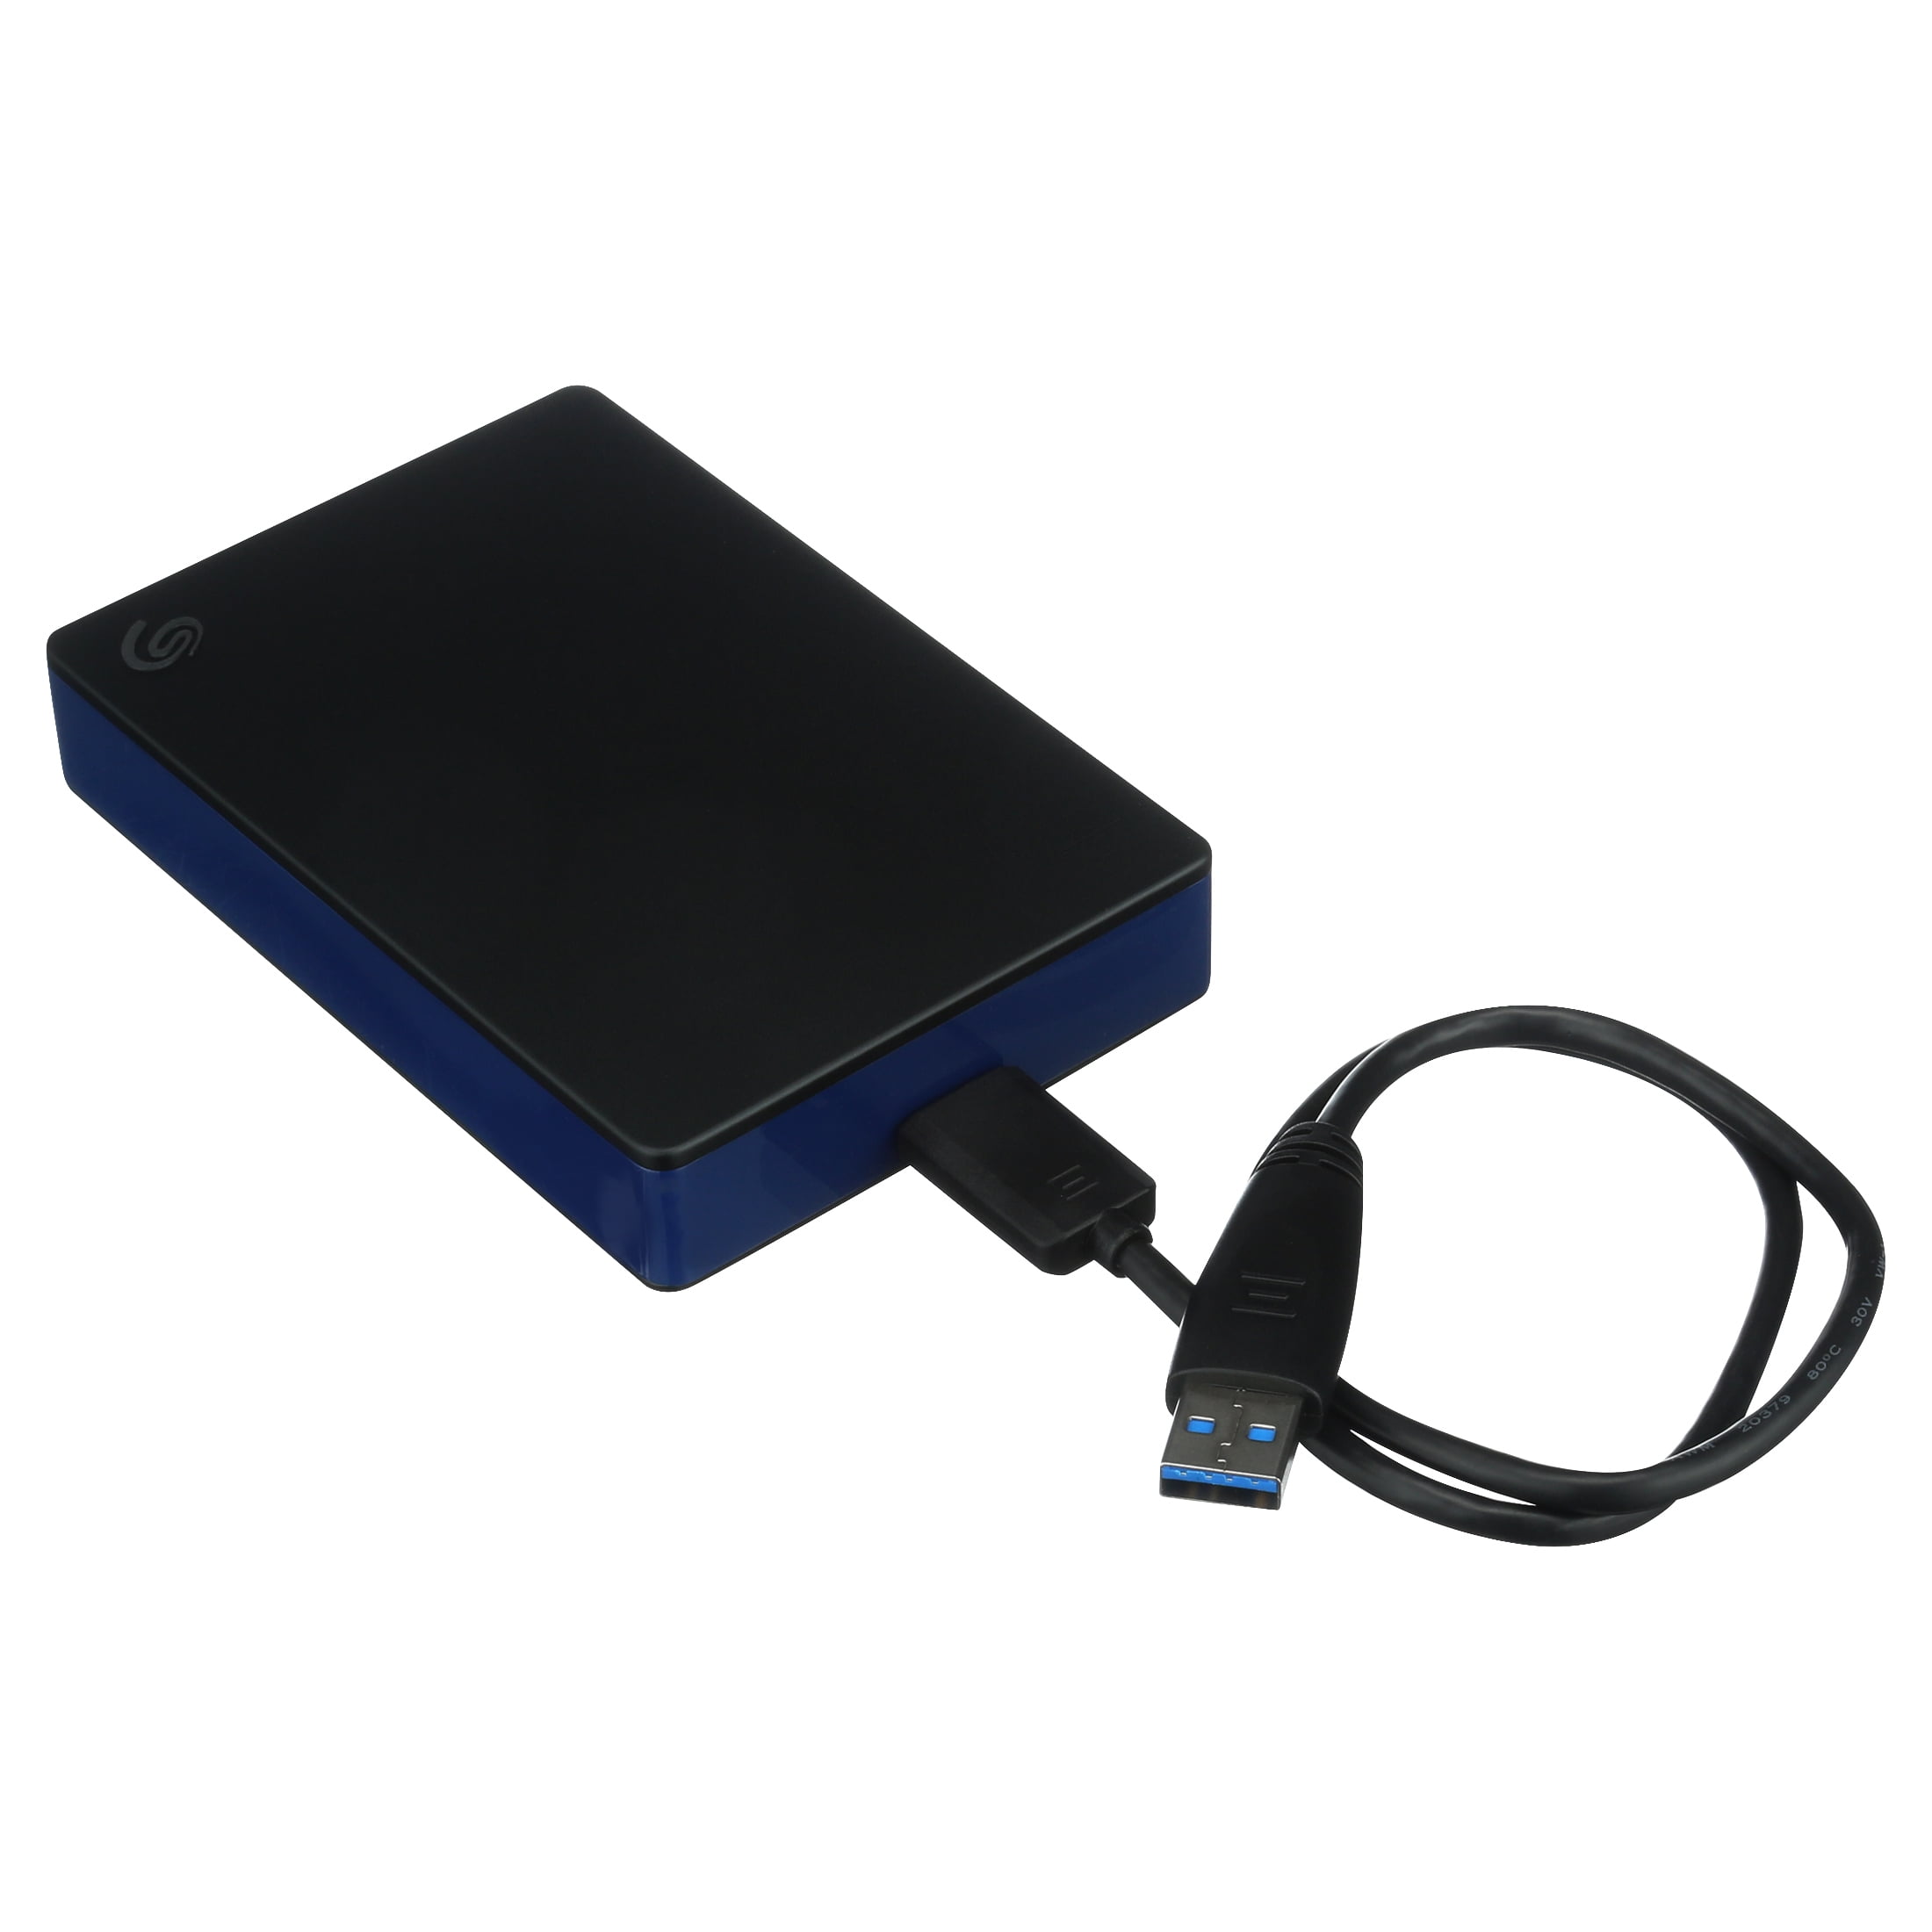 Seagate Game Drive Drive Portable-USB 4TB PlayStation 3.0 (Black) for Hard External